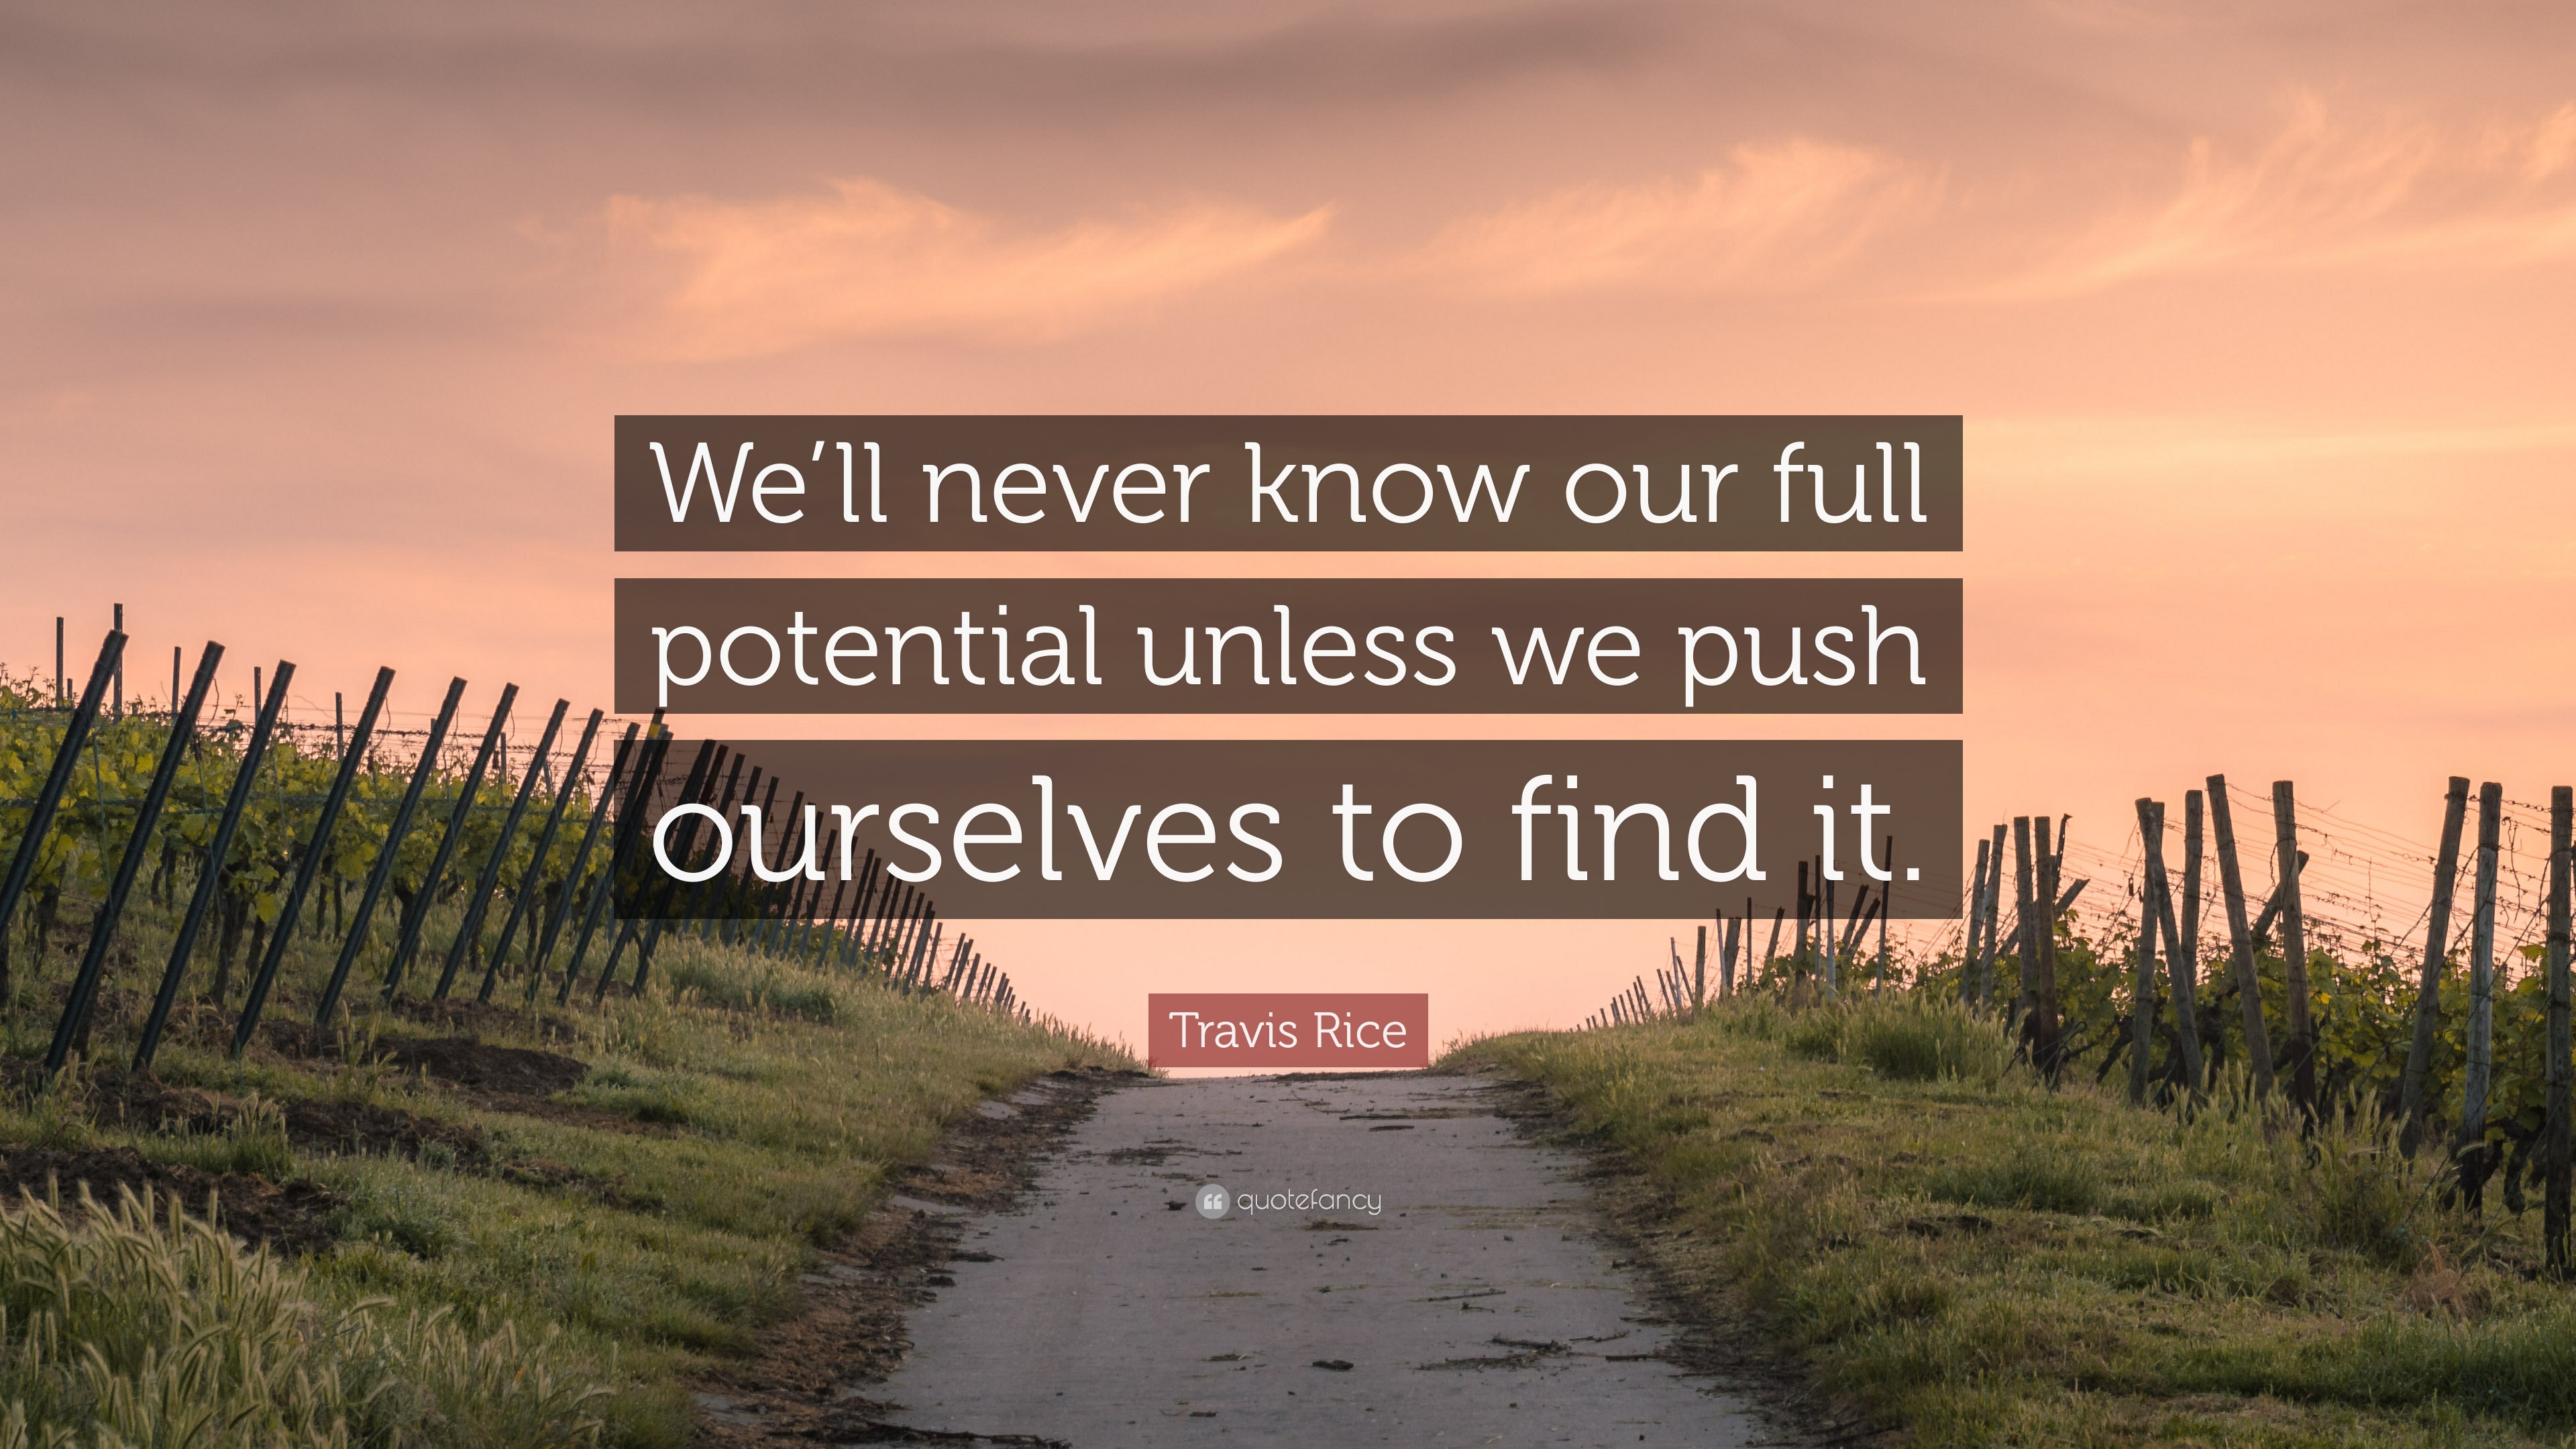 Travis Rice Quote: “We’ll never know our full potential unless we push ...